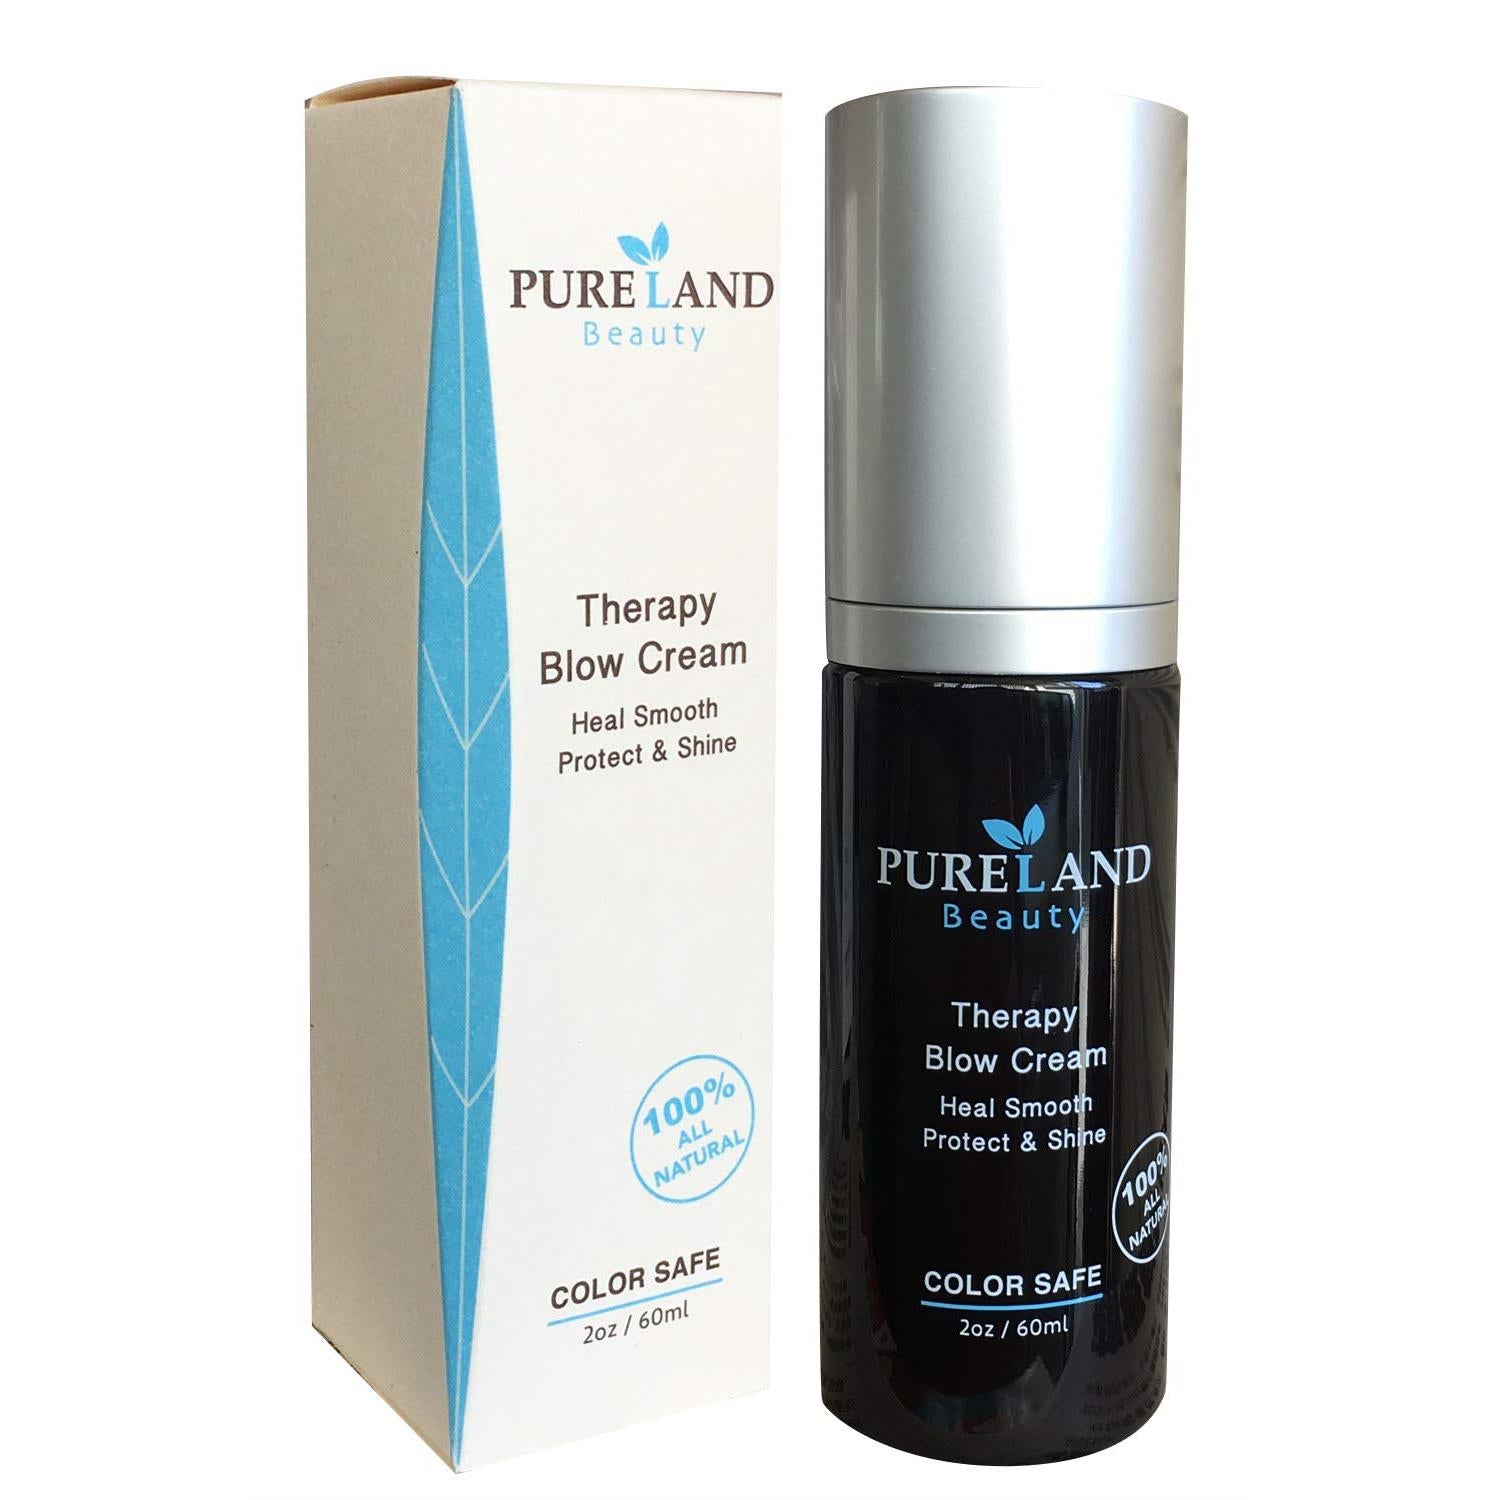 PURELAND Beauty Therapy Blow Cream, All Natural Leave-In Hair Repair Treatment - Heal, Smoothe, Protect and Shine any Hair Type - 2 oz.